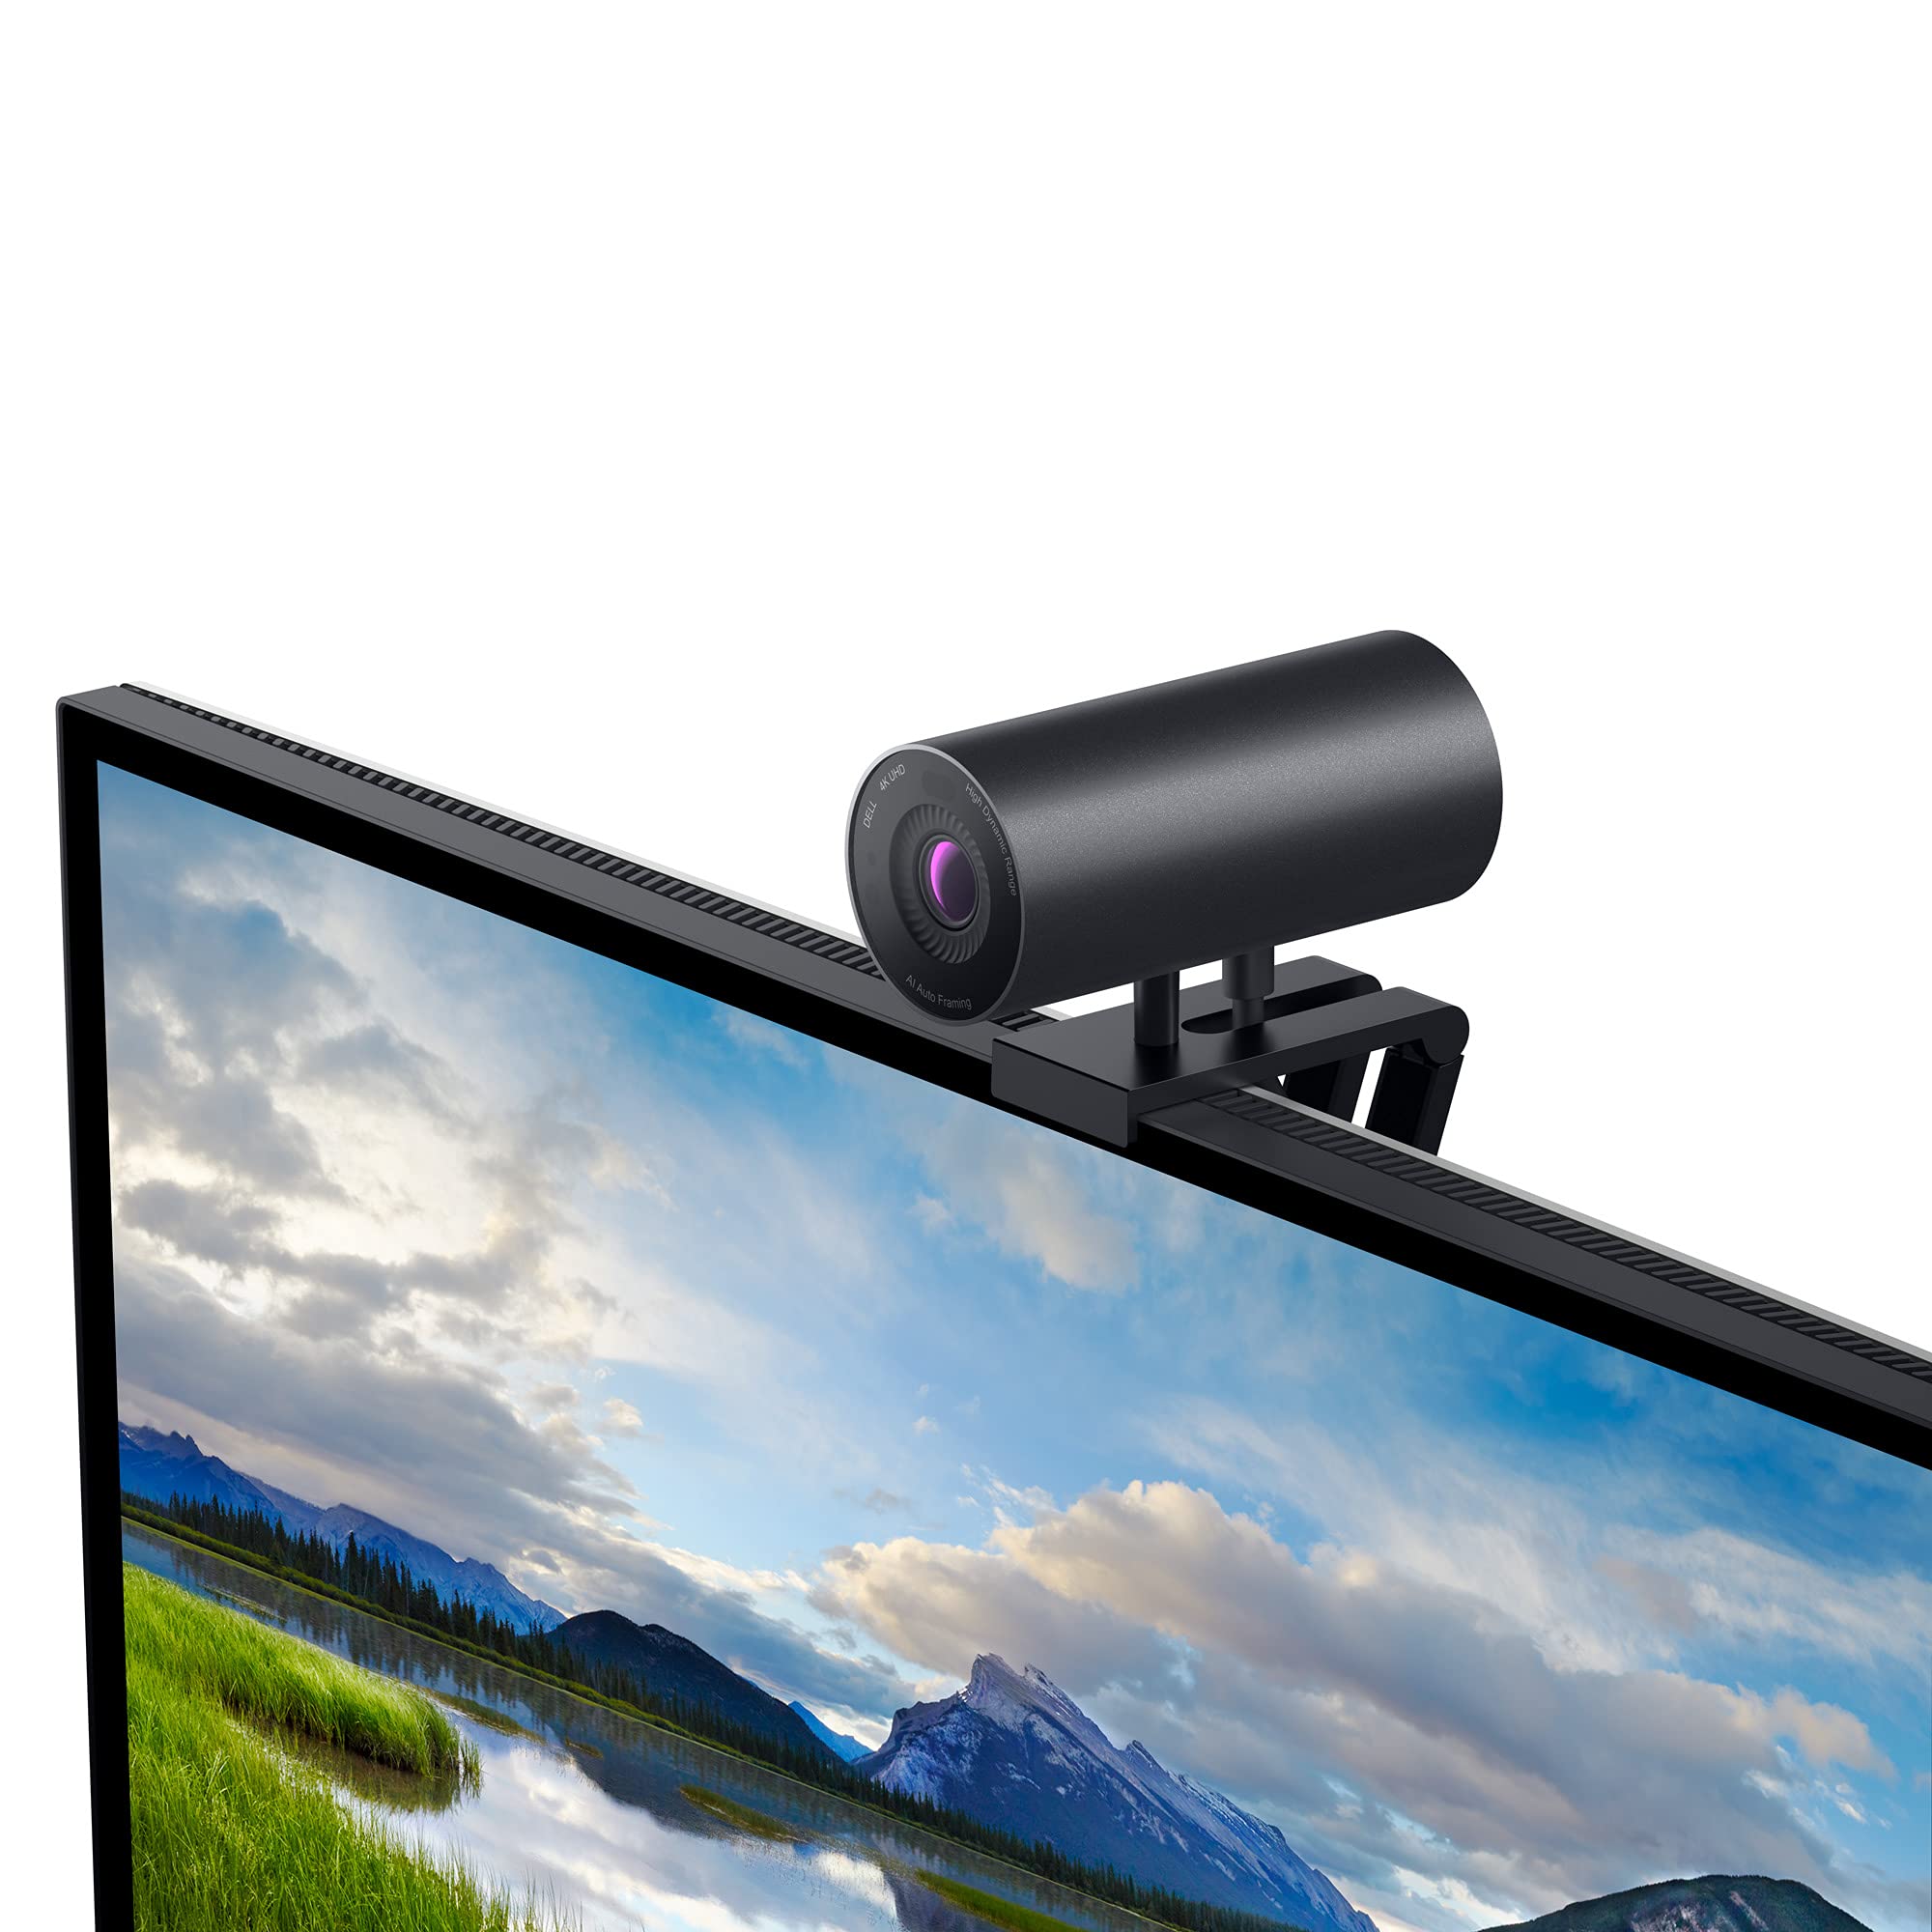 Dell UltraSharp HDR 4K Webcam with Privacy Cover, HD USB Computer Camera with 4K Sony STARVIS CMOS / IR / Proximity Sensor,  Black - Anodized Aluminum - WB7022 – for Windows